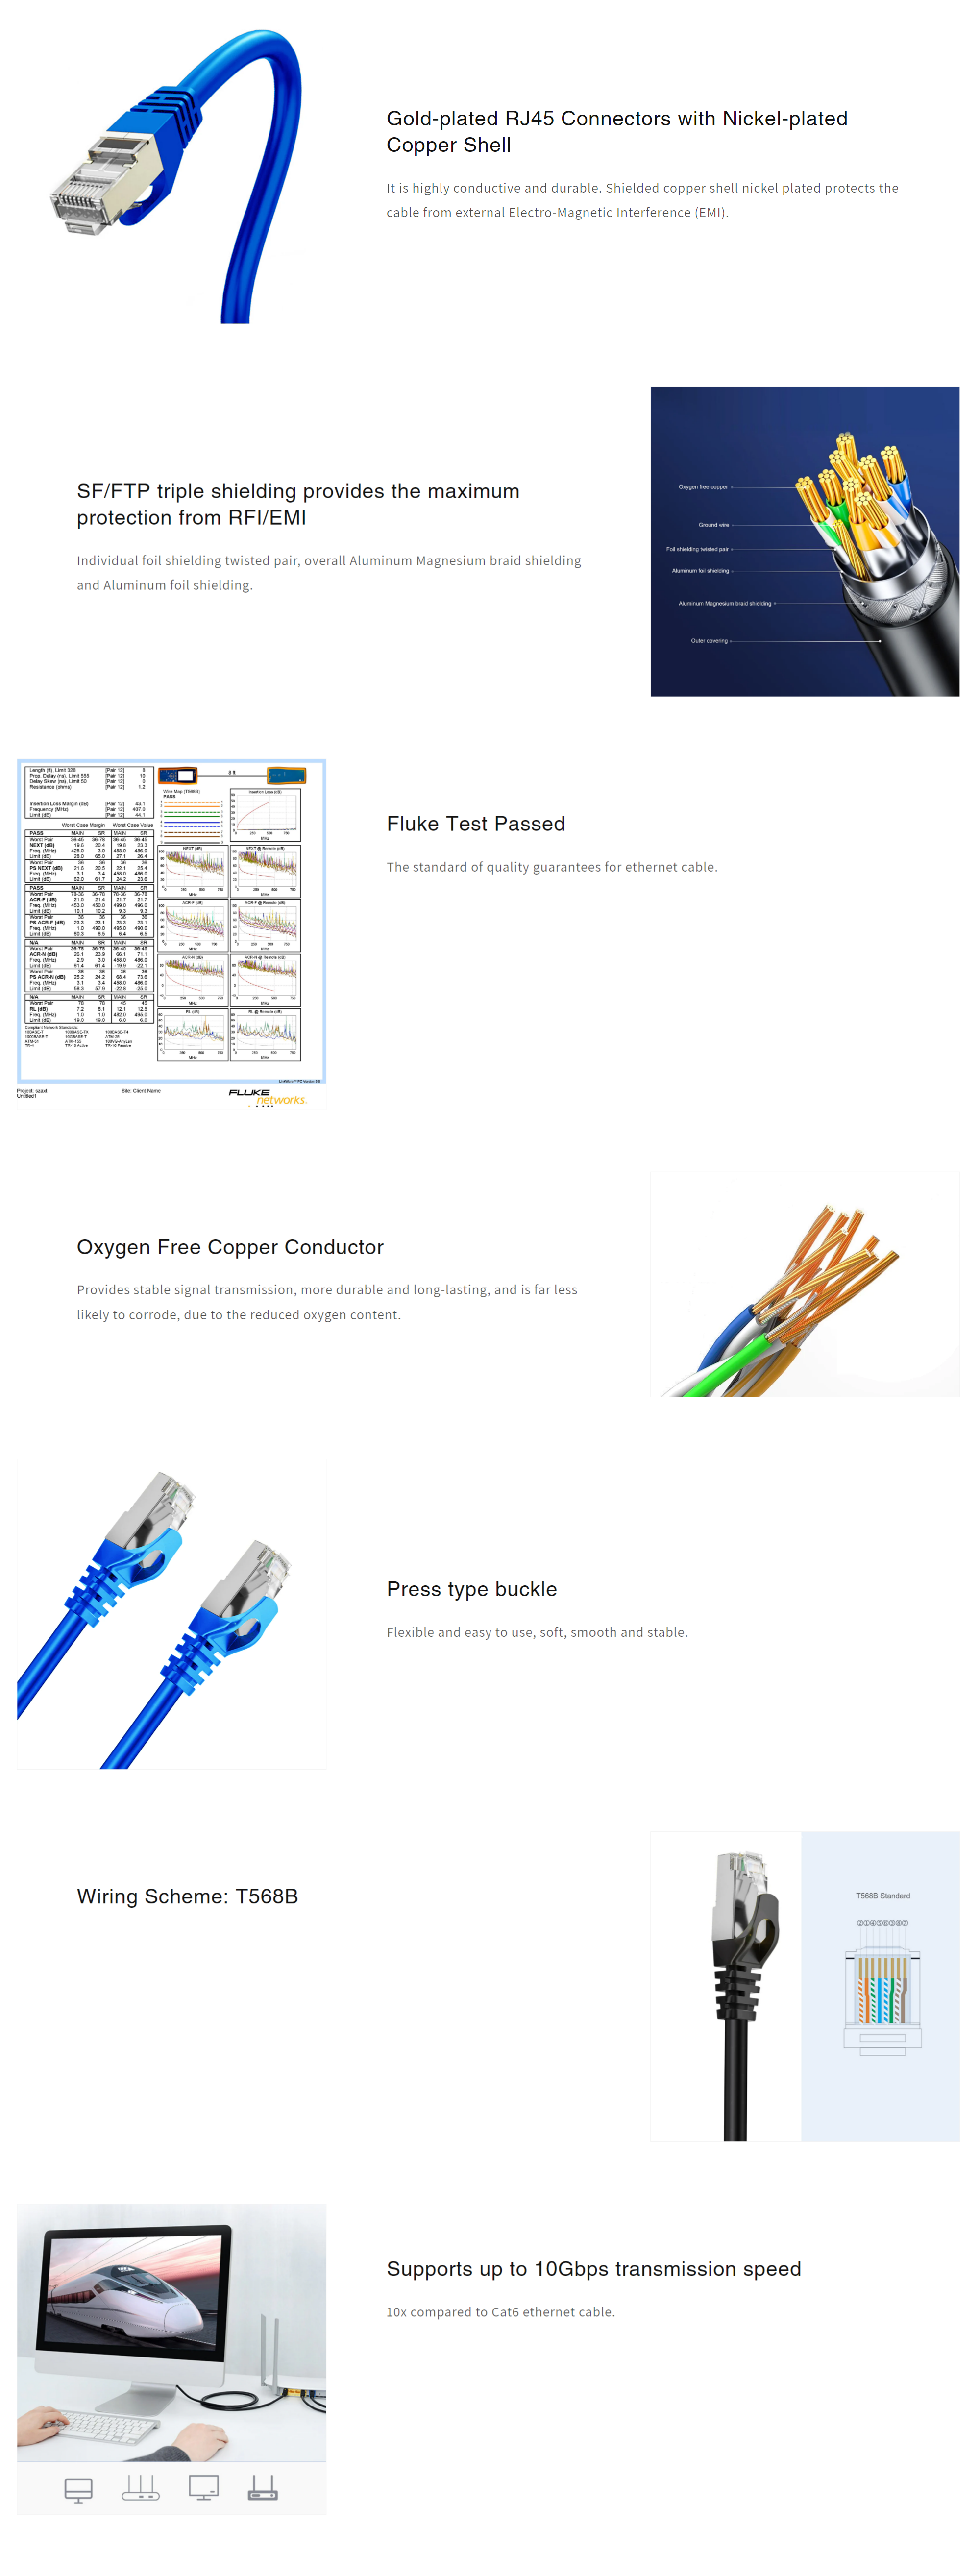 A large marketing image providing additional information about the product Cruxtec Cat7 50m 10GbE SF/FTP Triple Shielding Network Cable Blue - Additional alt info not provided